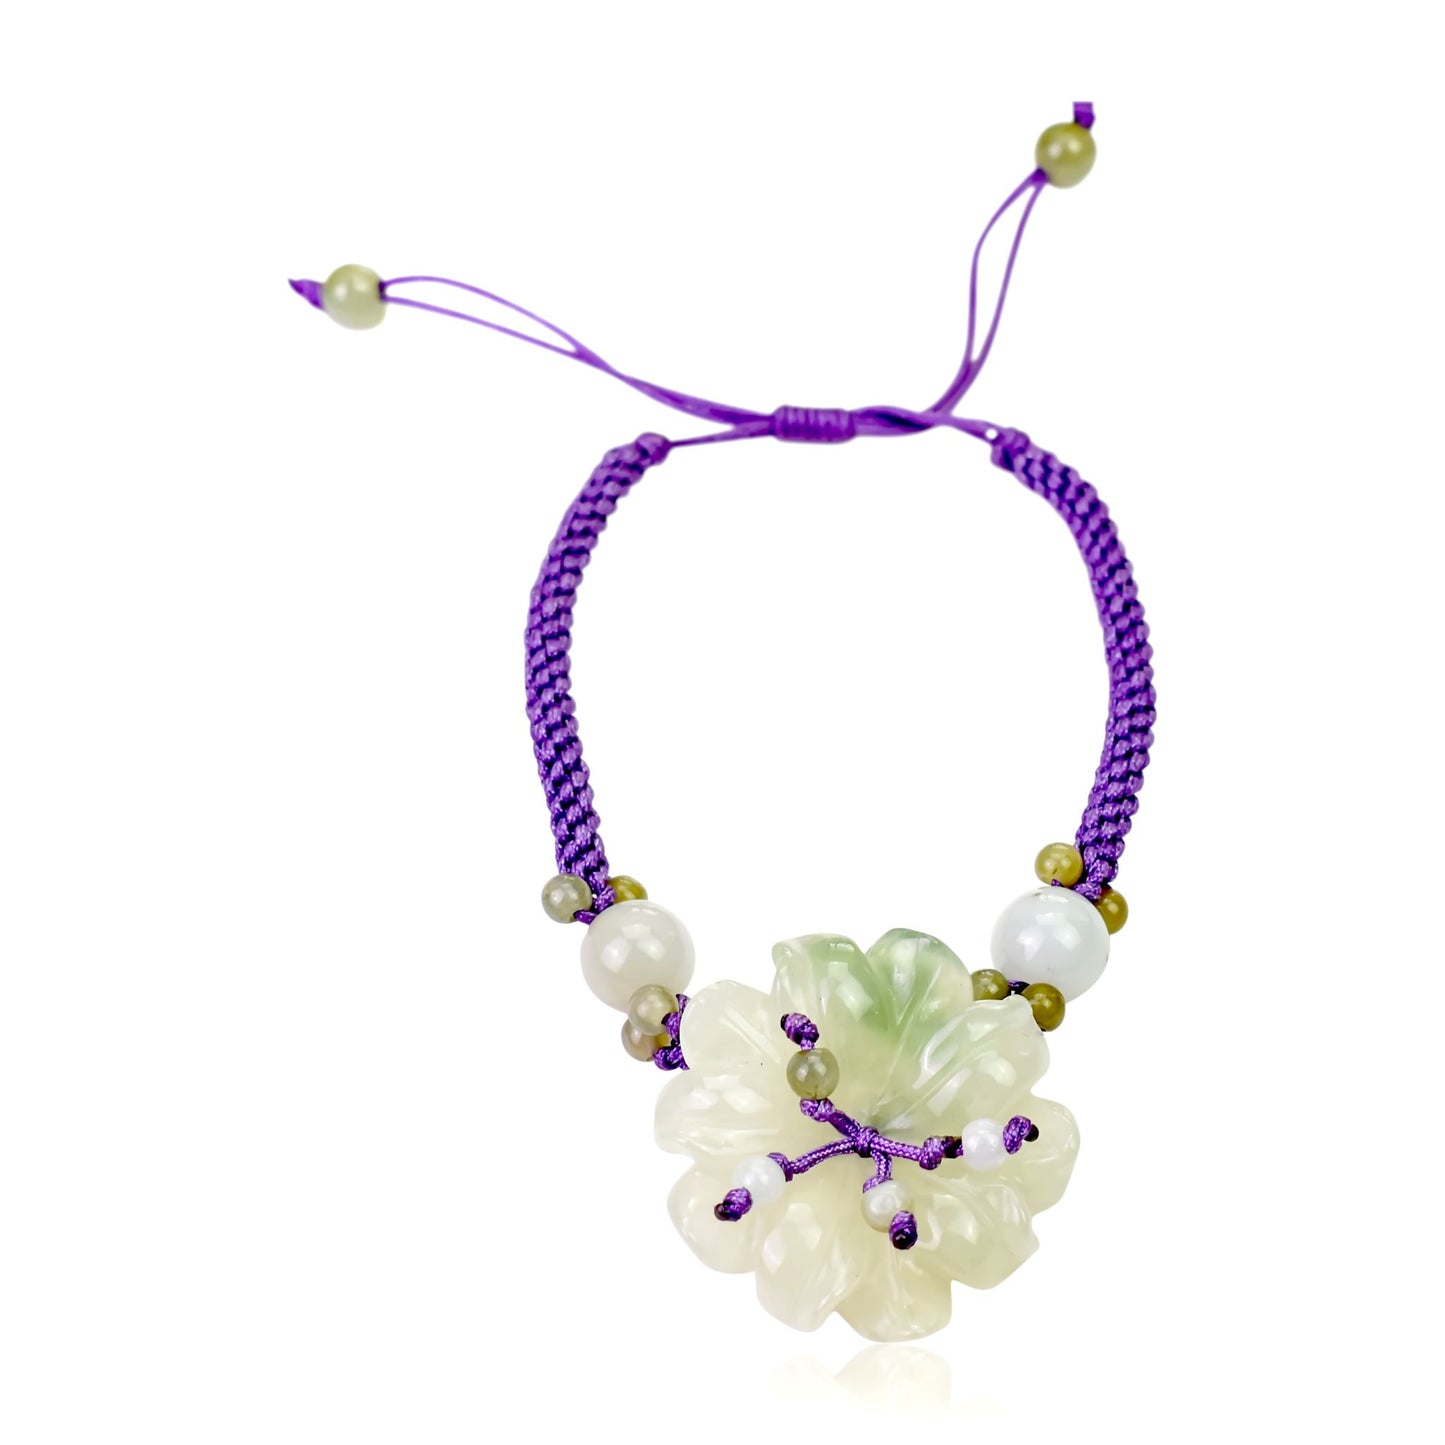 Add Sparkle to Your Outfits with the Anemone Flower Bracelet made with Purple Cord